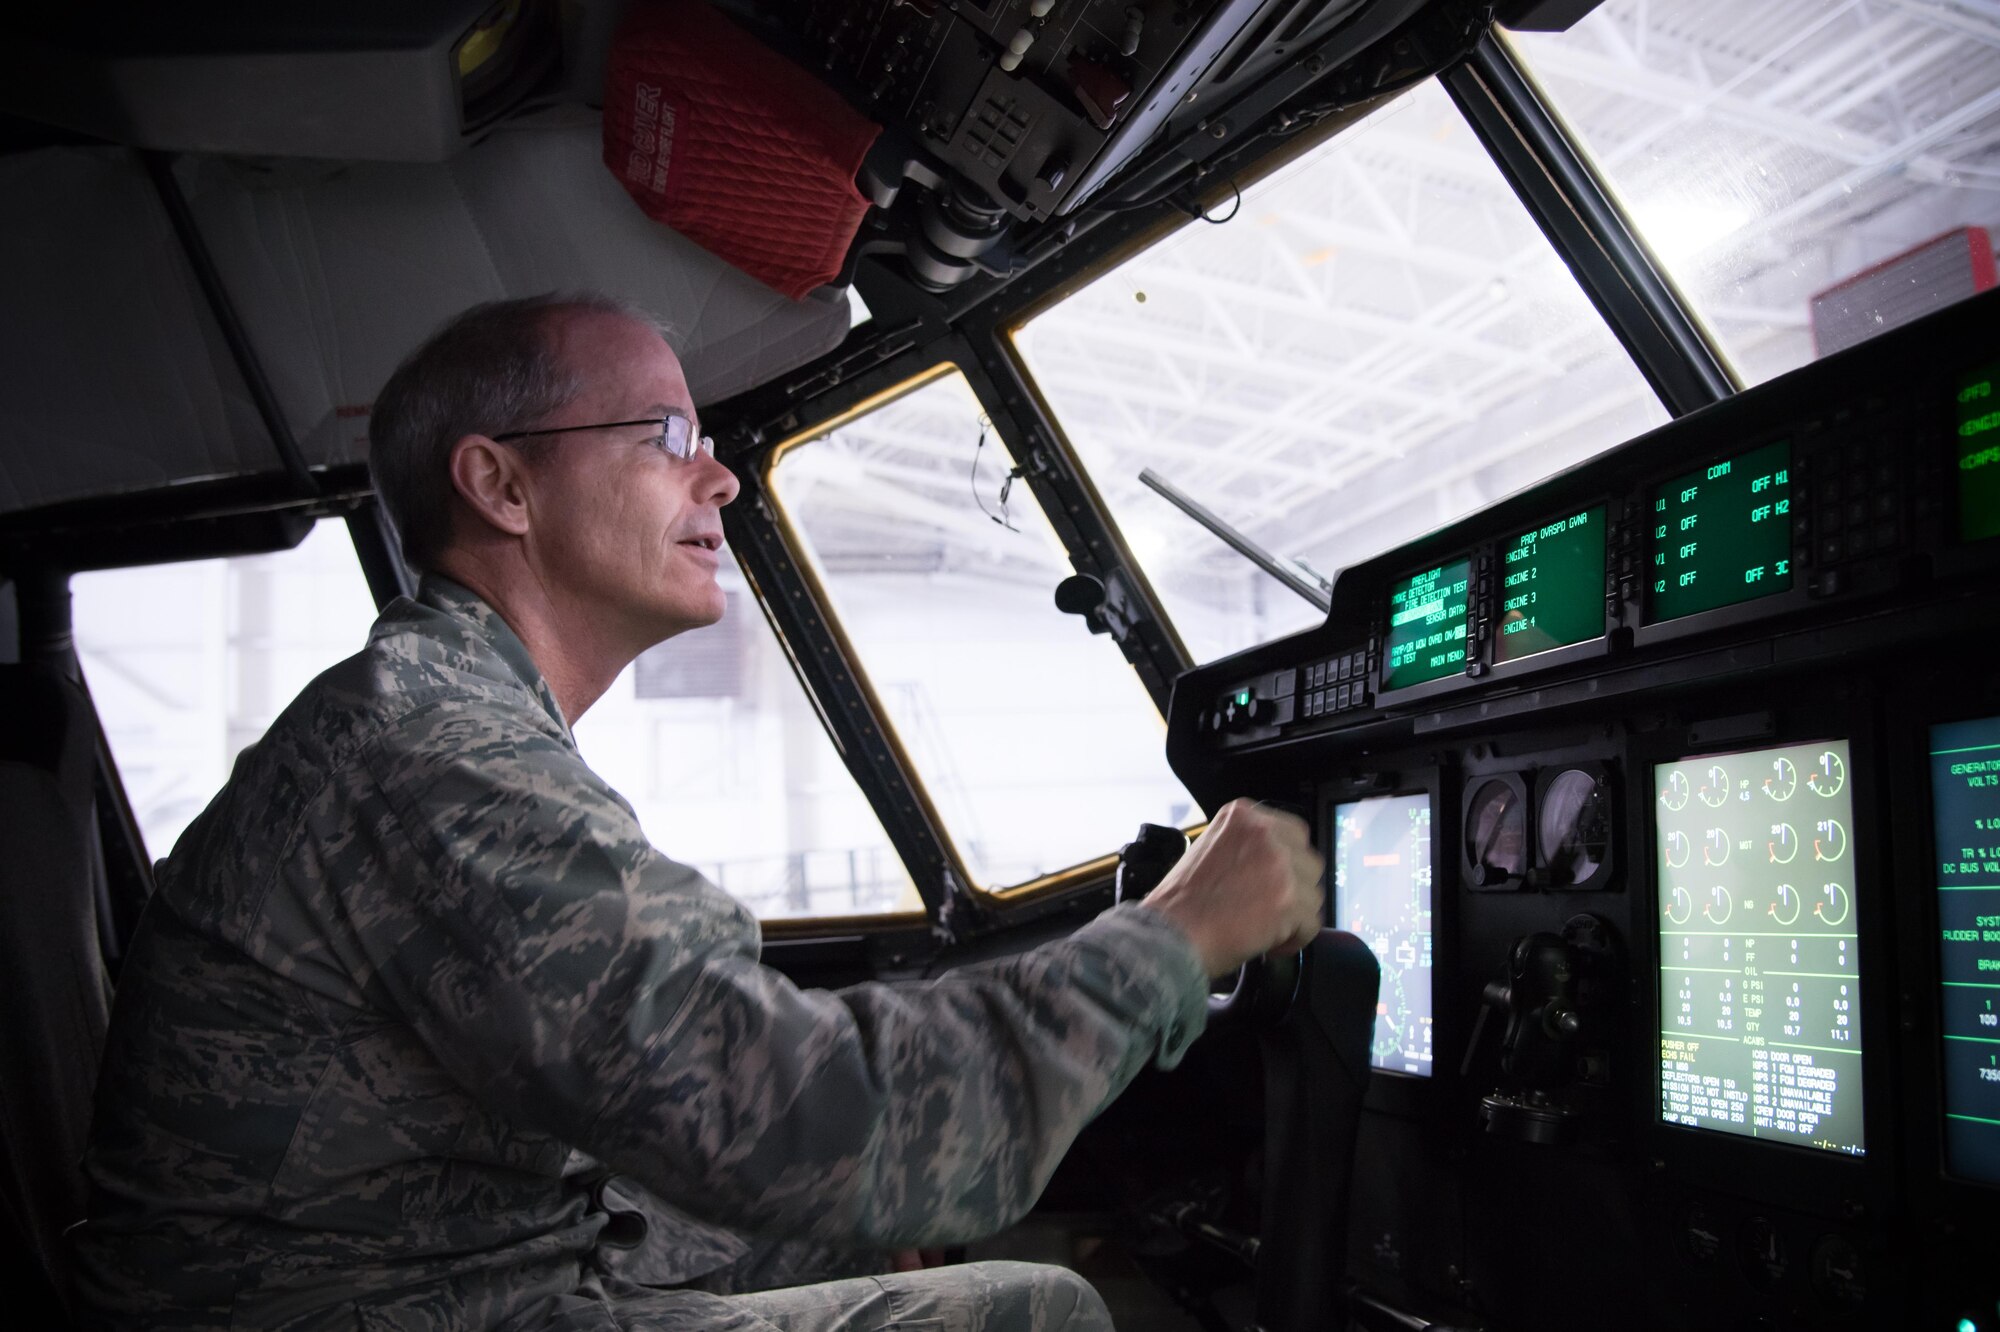 Maj. Gen. Robert LaBrutta, 2nd Air Force commander, turns on a C-130J Super Hercules aircraft for maintenance inspections during a 403rd Wing immersion tour Feb. 3 at Keesler Air Force Base, Mississipi. (U.S. Air Force photo/Staff Sgt. Heather Heiney) 